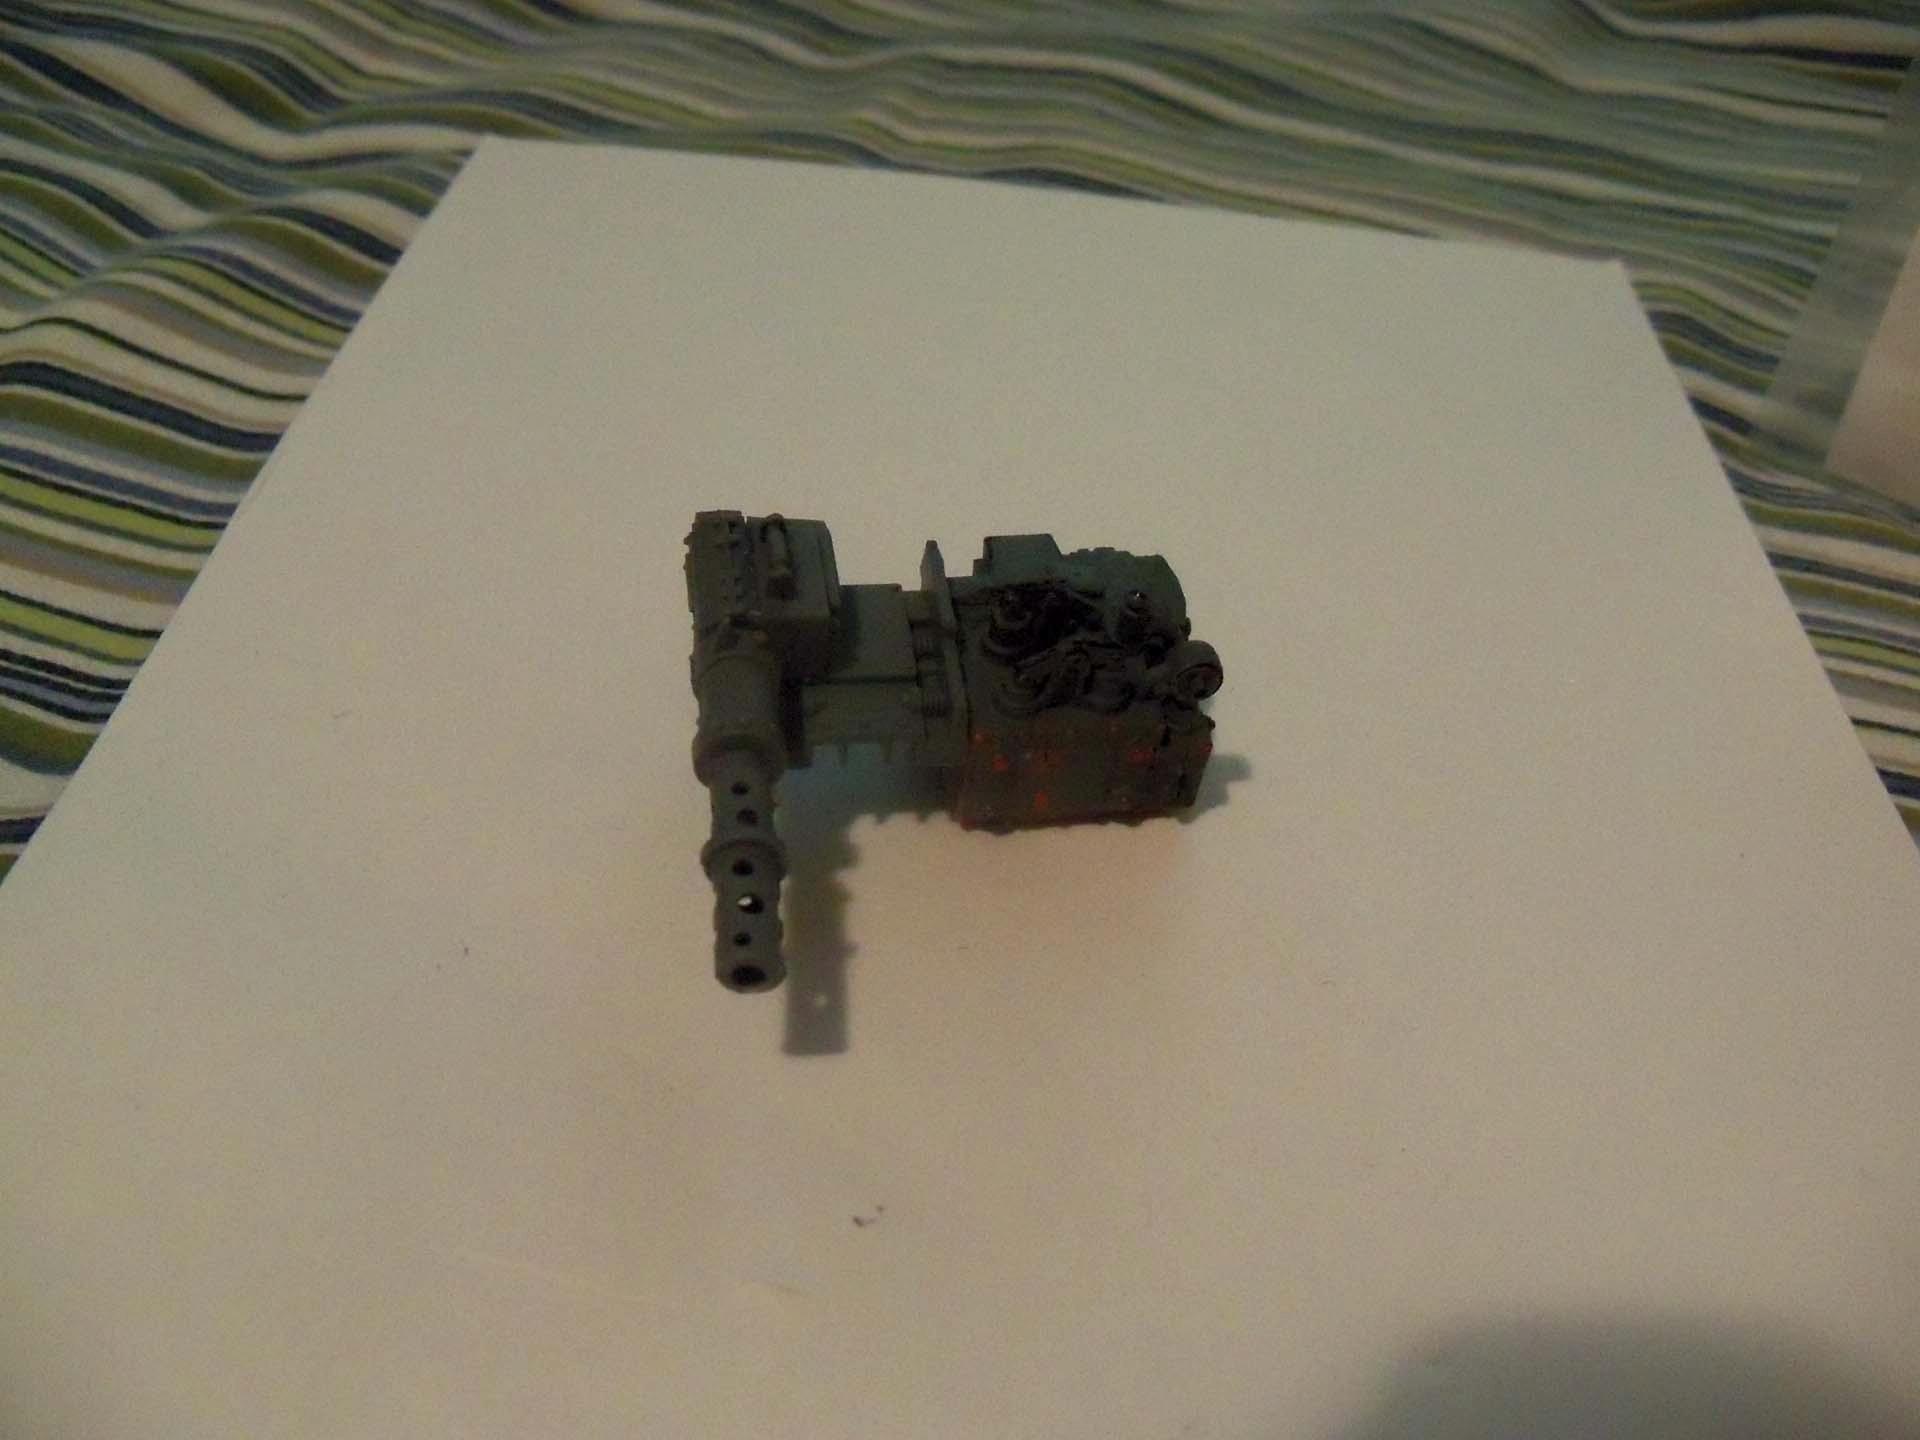 added the dakkacannon onto the engine. Used a space marine lascannon(probably from a vehicle) and the smoke stack from the wartrukk for the barrel